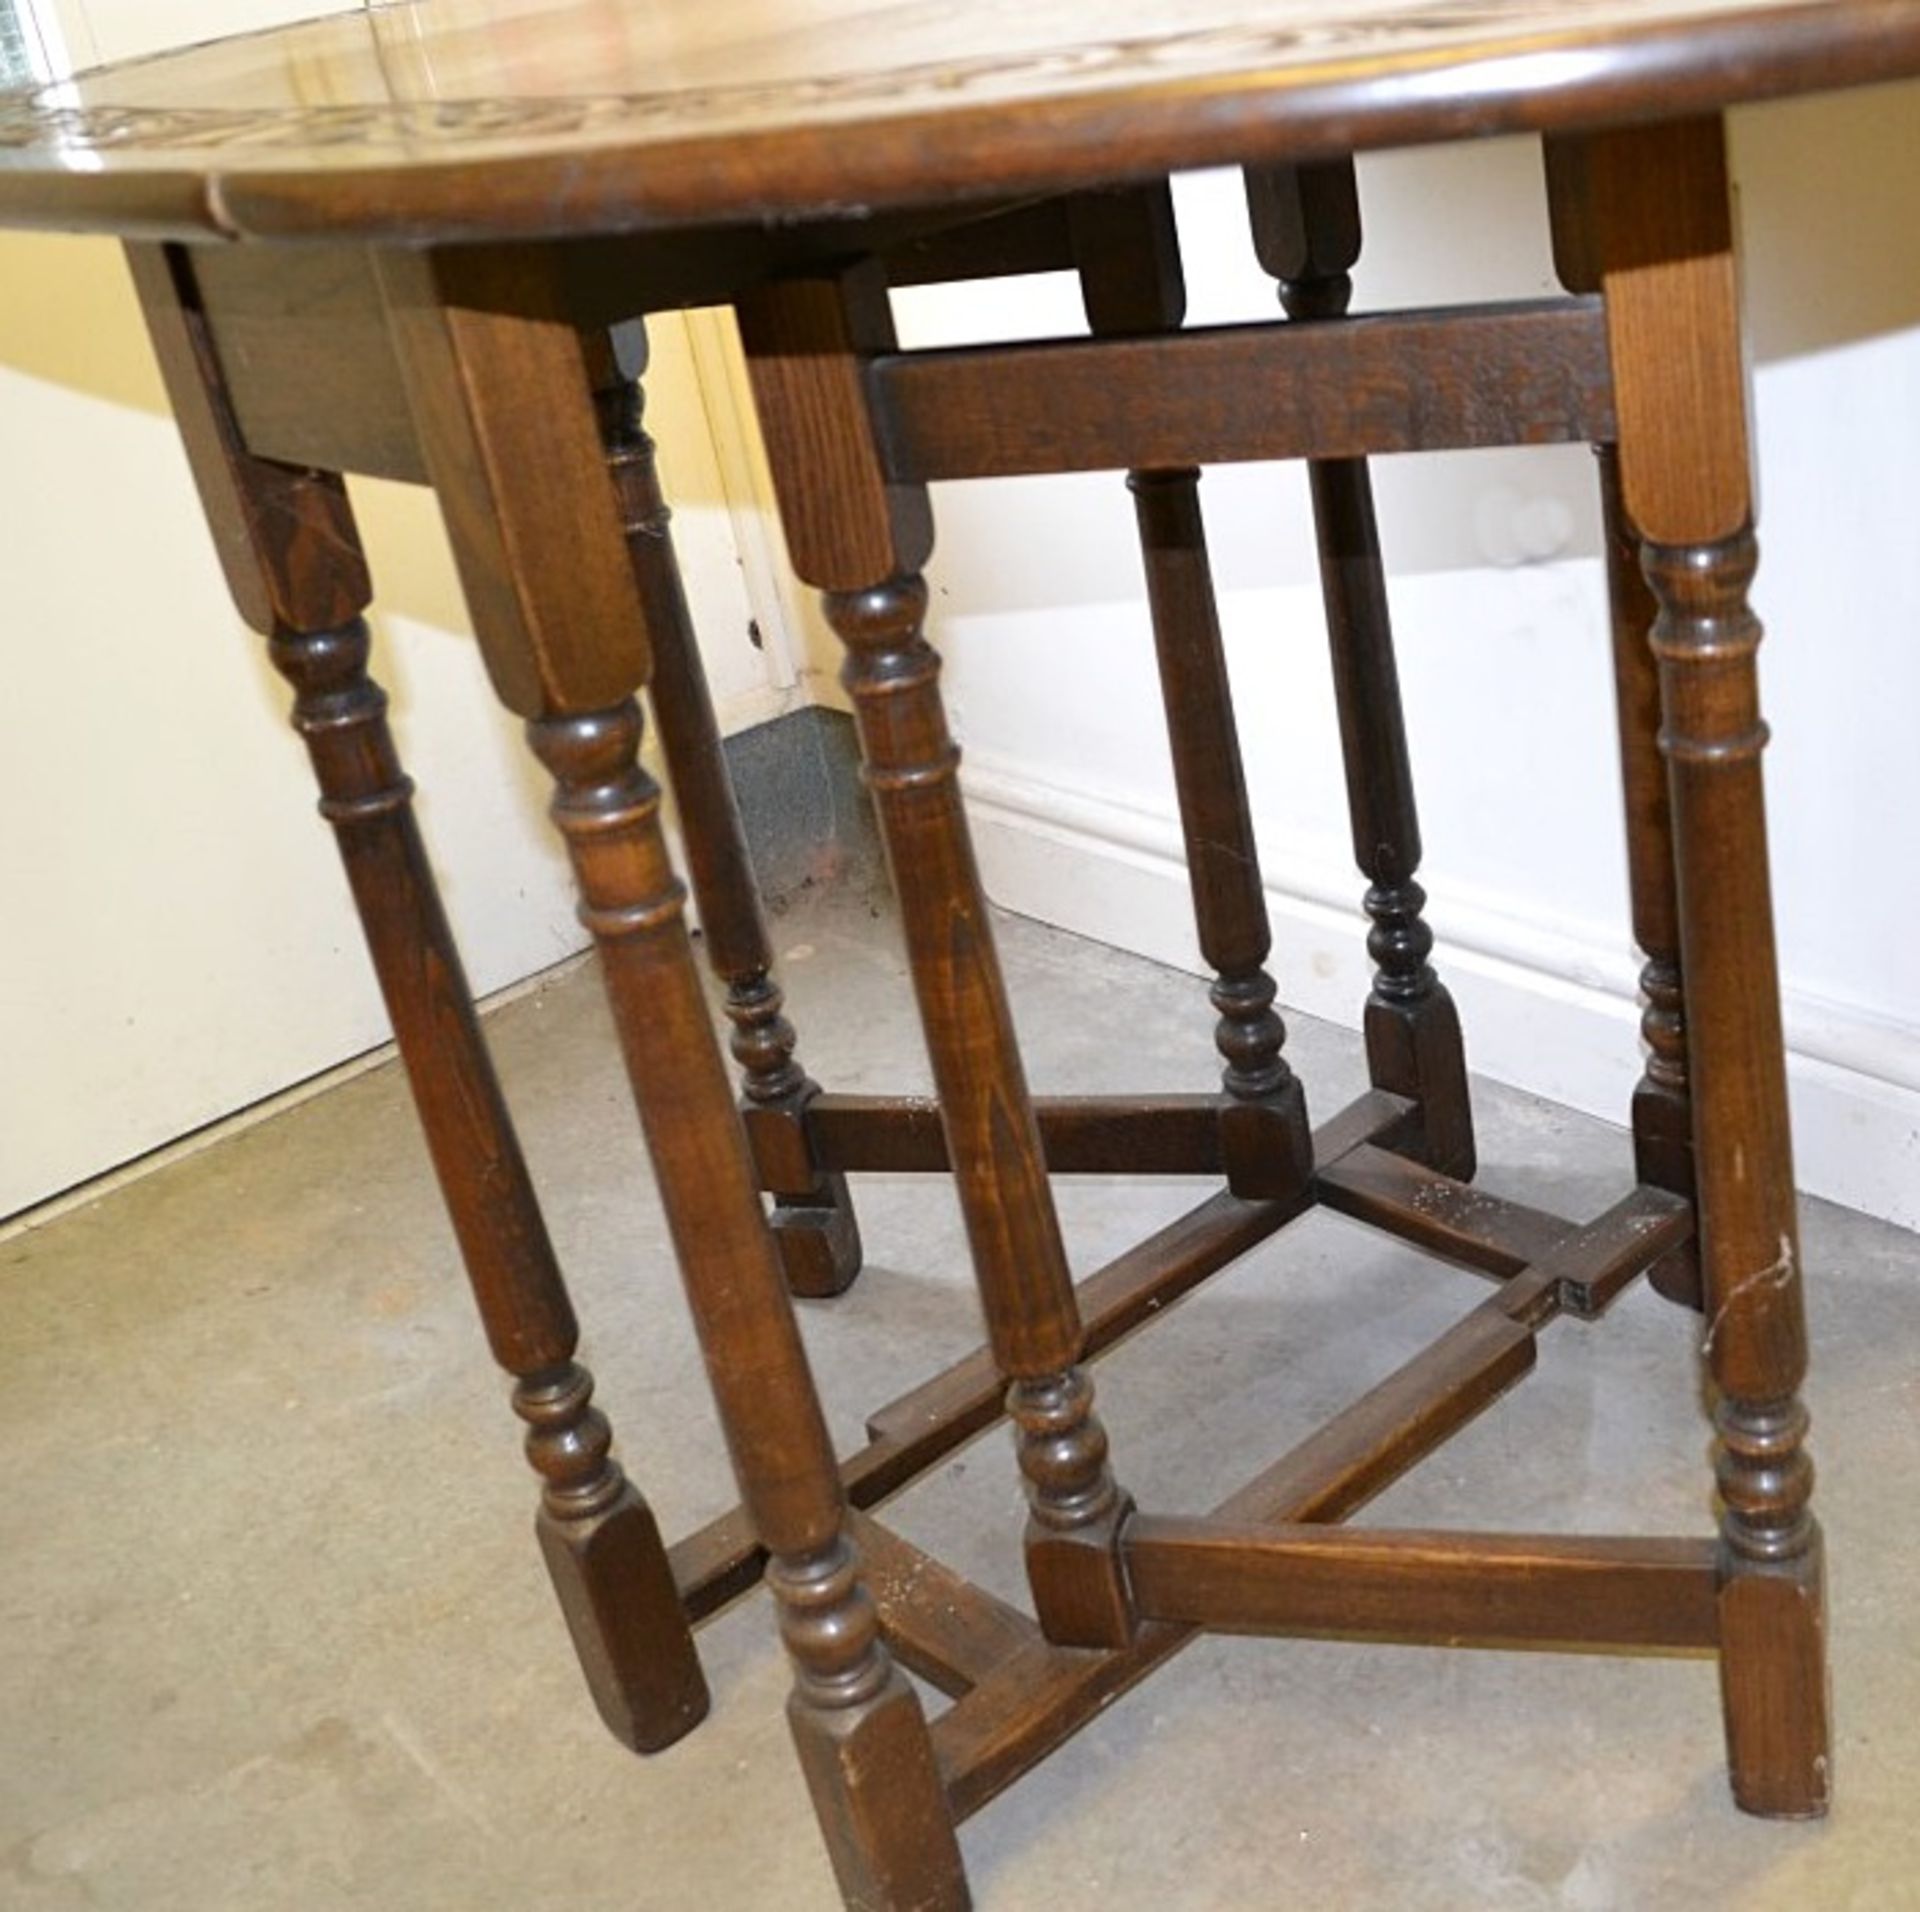 1 x Vintage Drop Leaf Solid Wood Table With Carved Floral Decoration - From A Grade II Listed Hall - Image 6 of 9